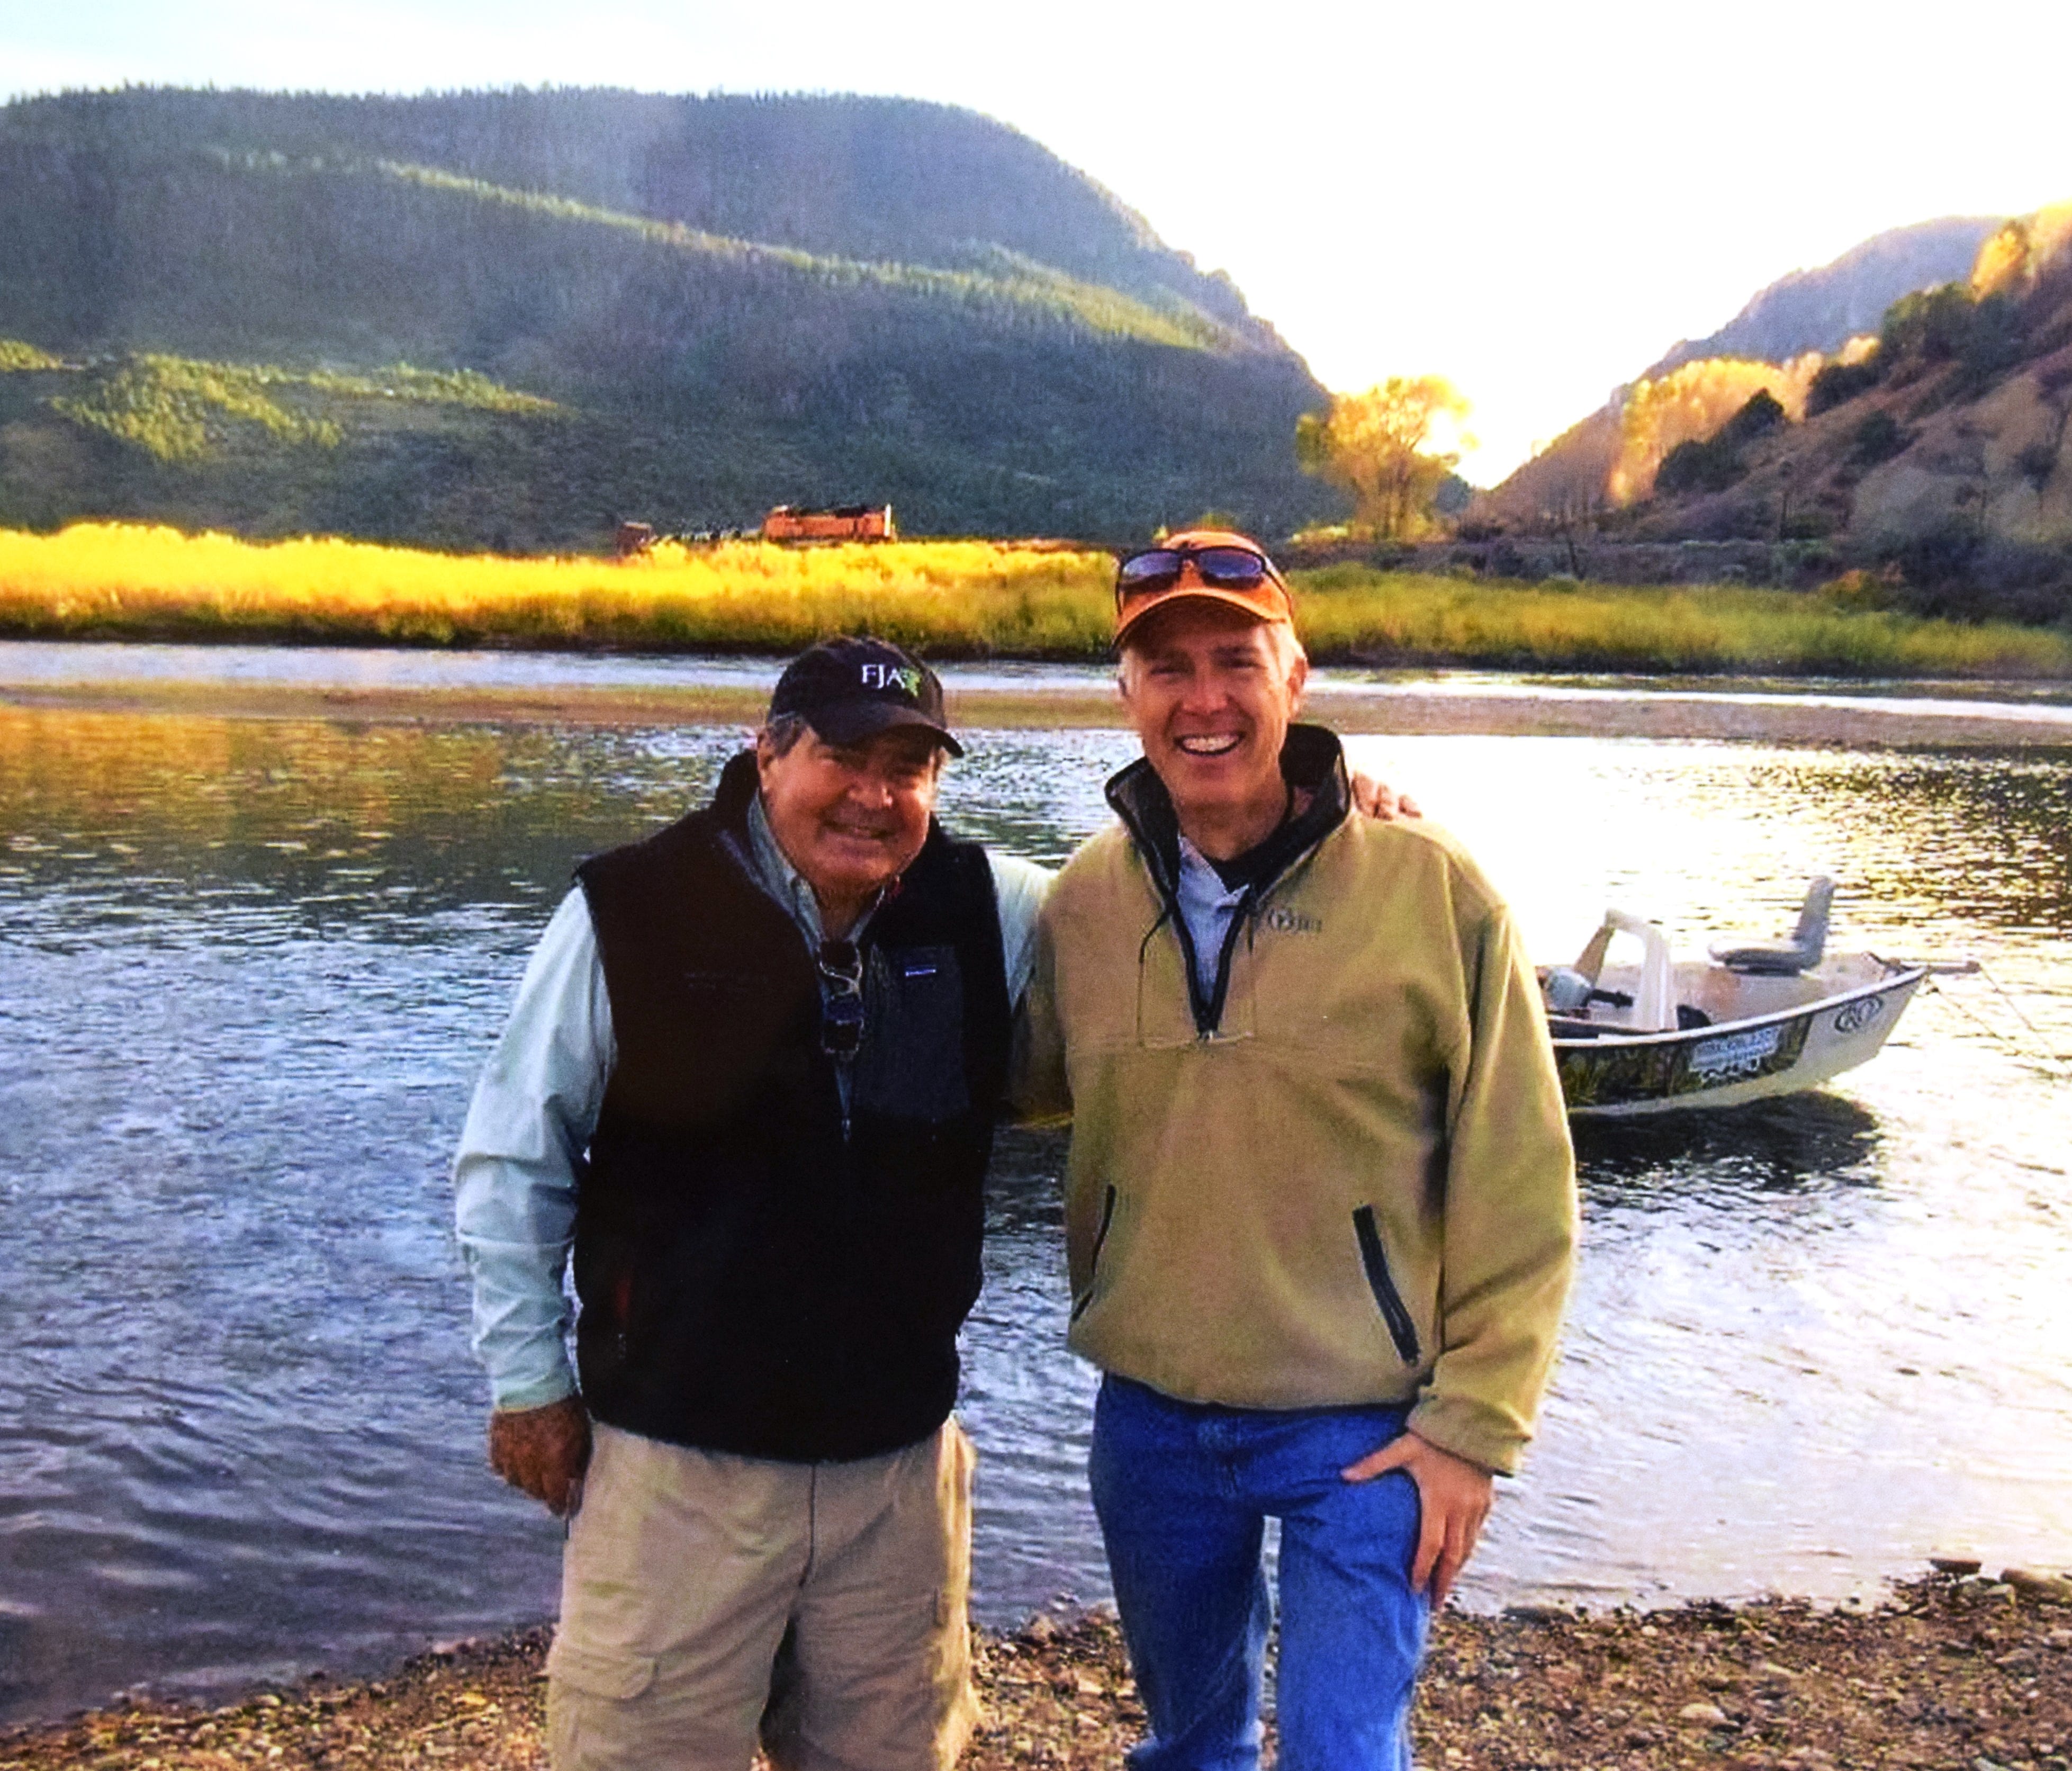 The late Justice Antonin Scalia and Judge Neil Gorsuch, who is in line to be his successor, on the Colorado River during a fishing trip.